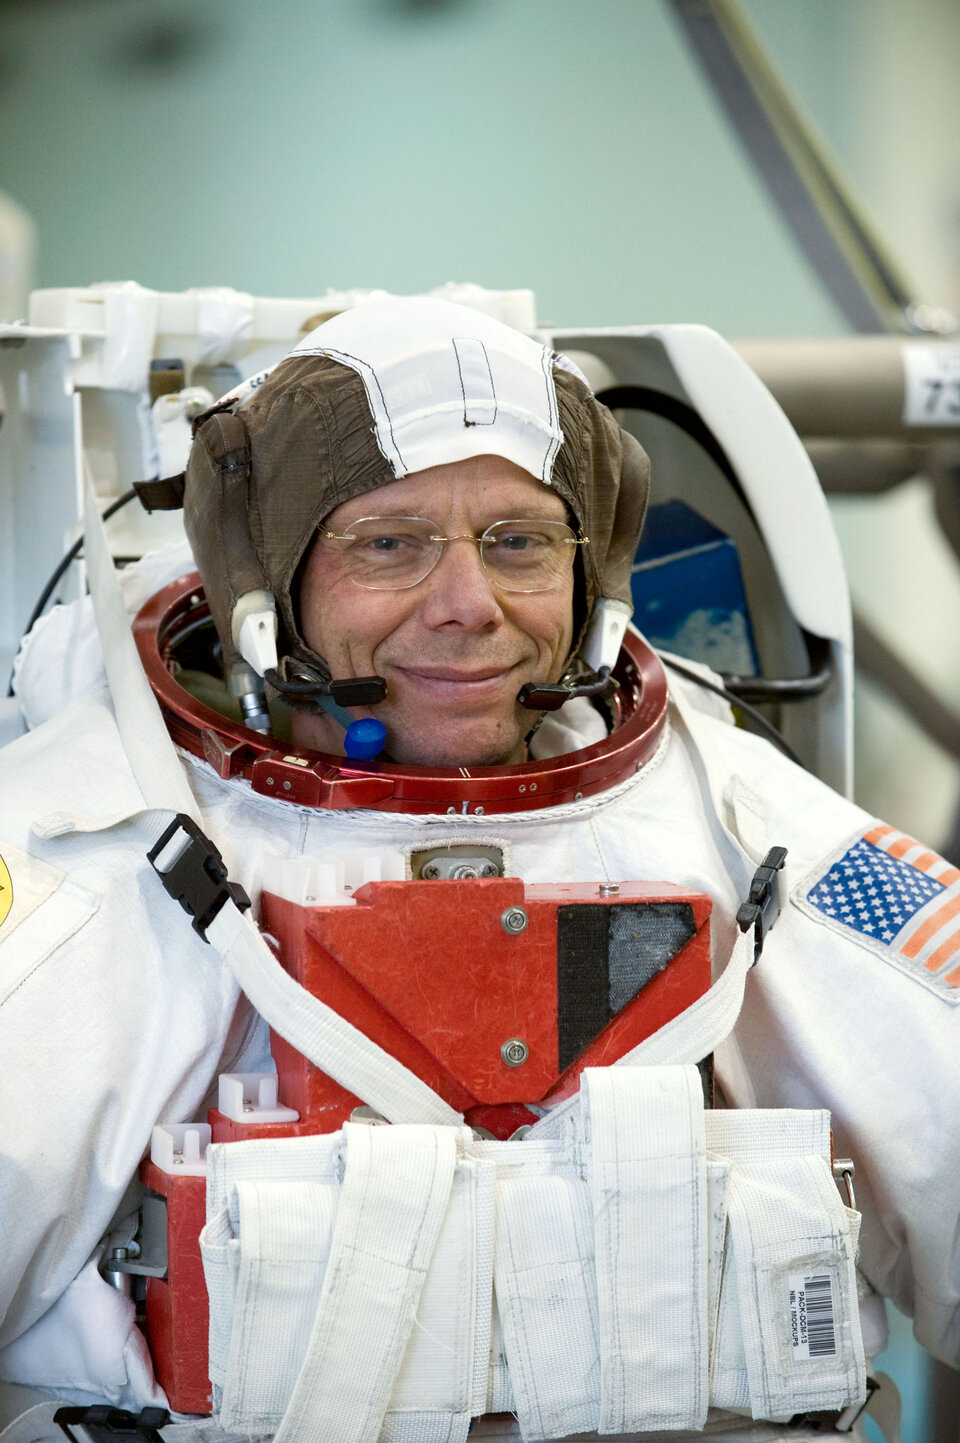 Fuglesang is due to take part in two of the mission's three spacewalks